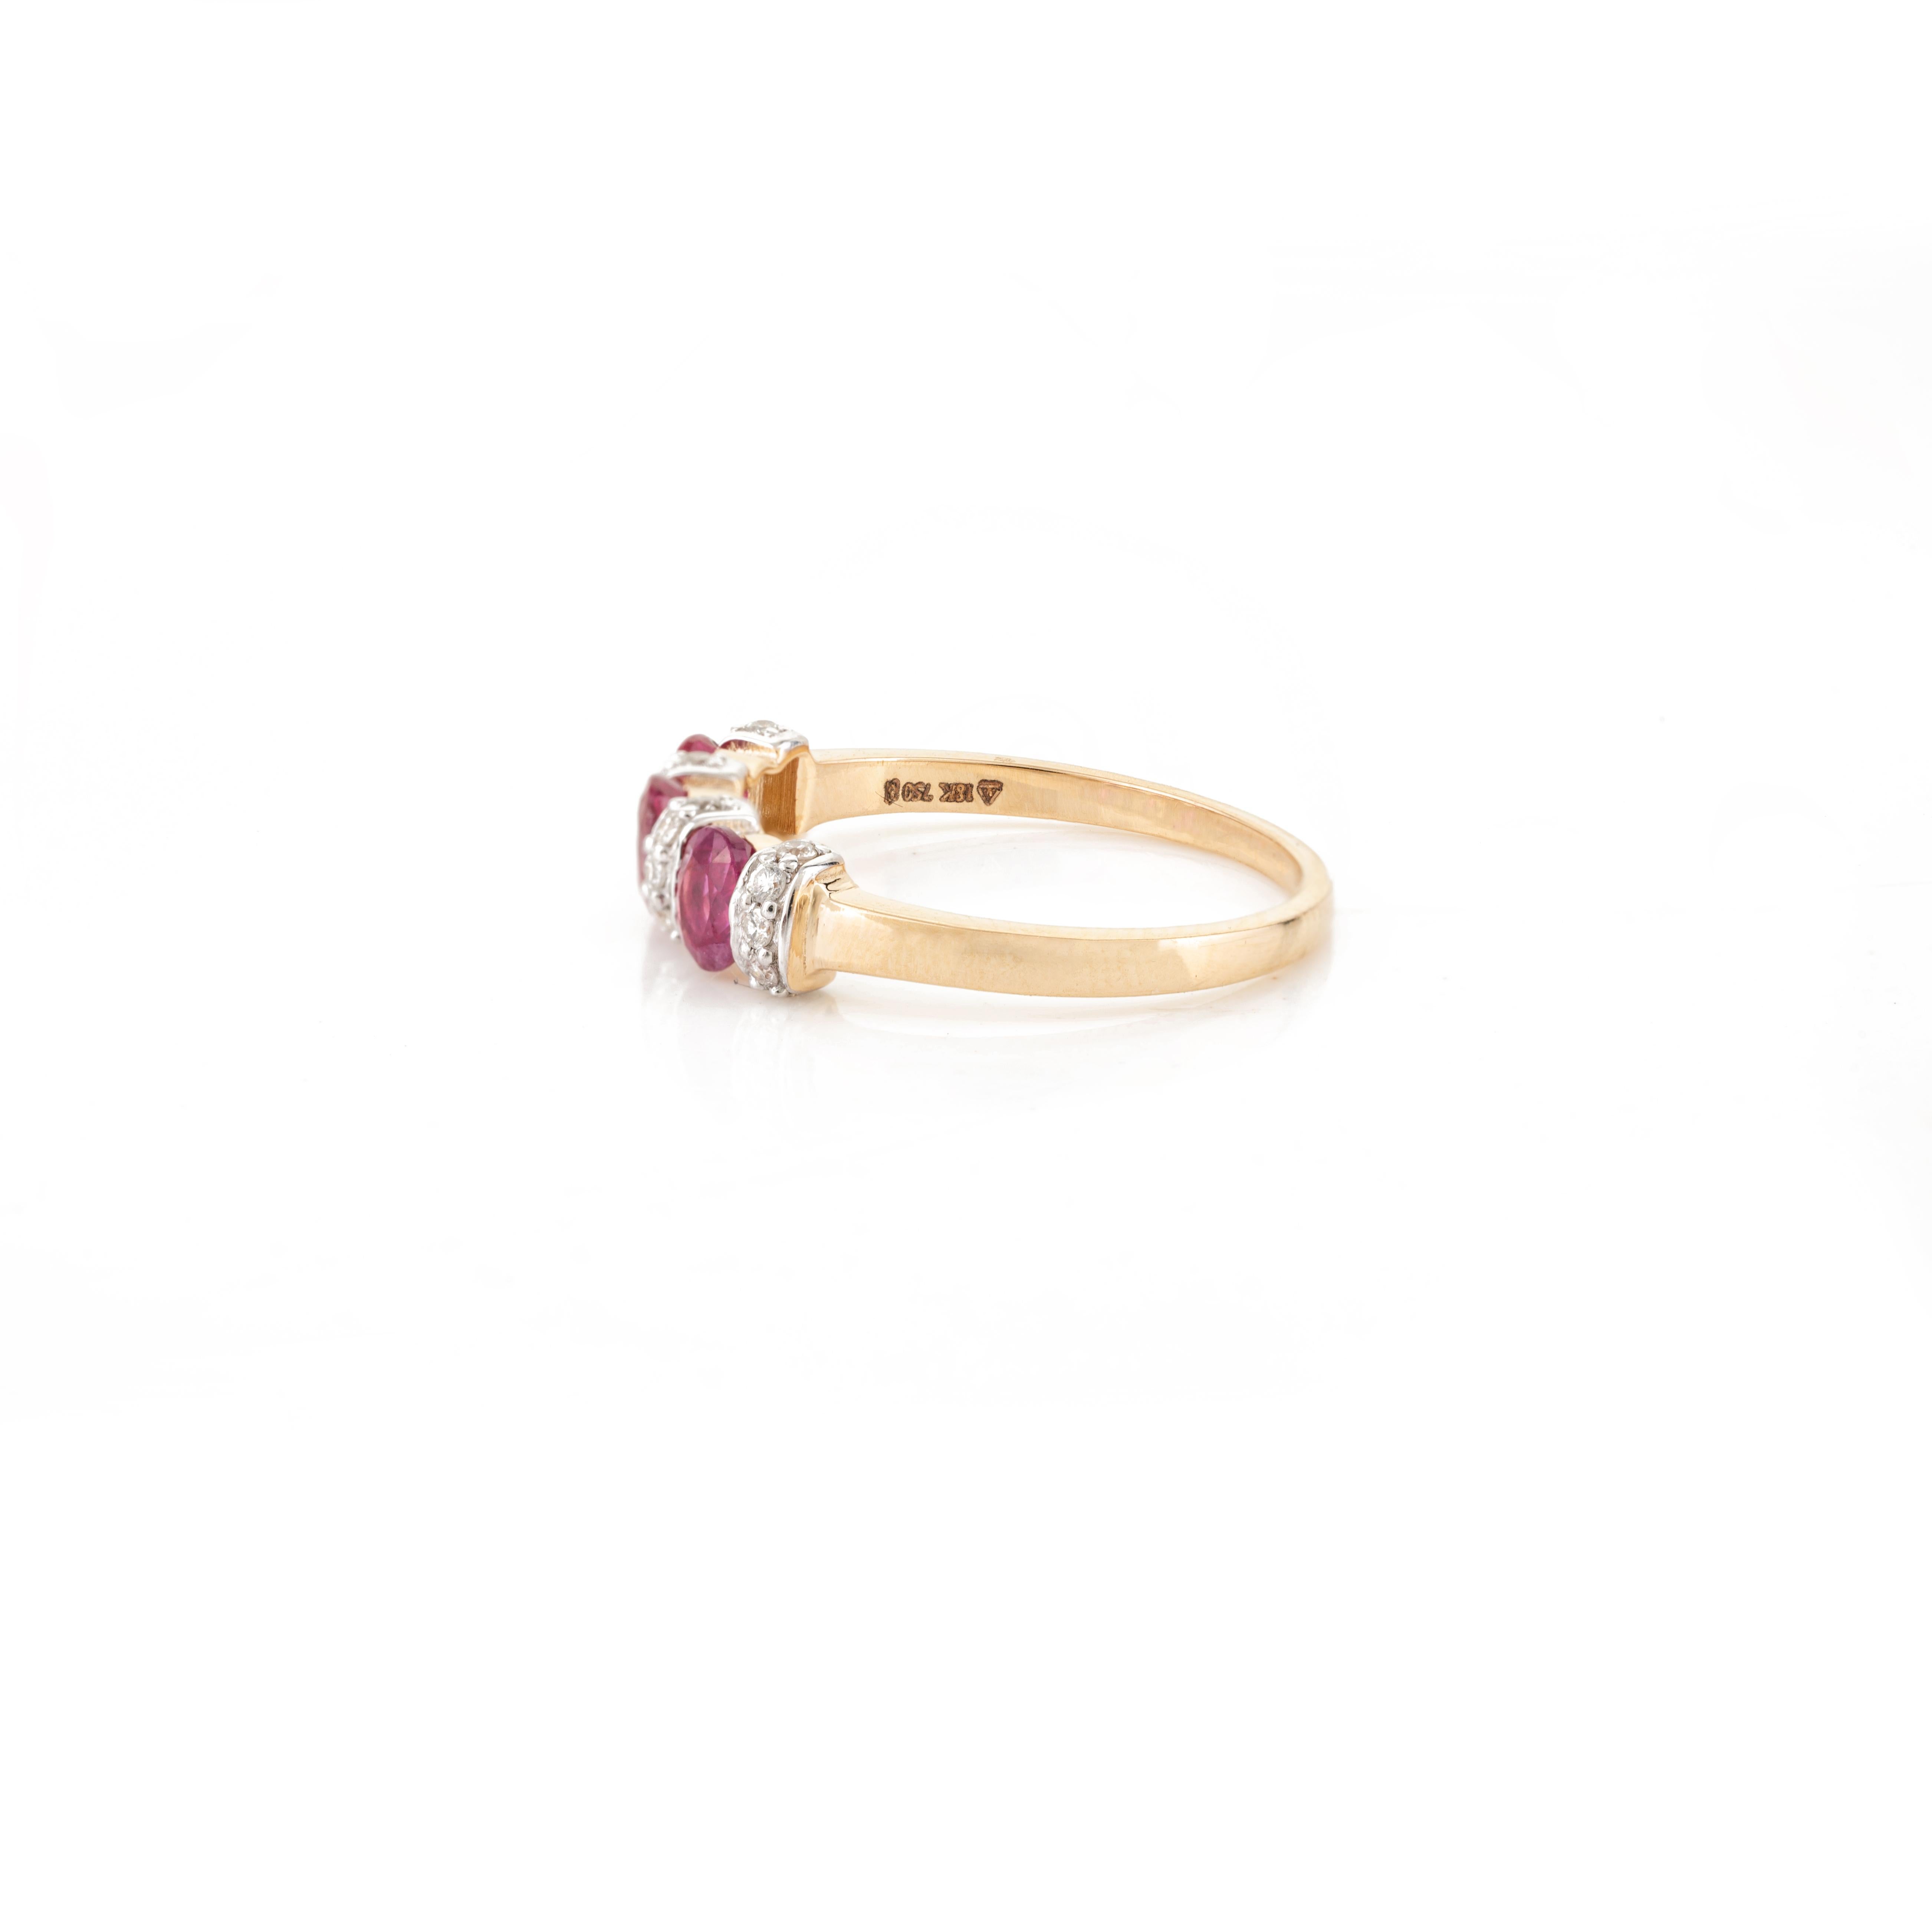 For Sale:  Alternating Ruby Diamond Engagement Band Ring in 18k Solid Yellow Gold  5